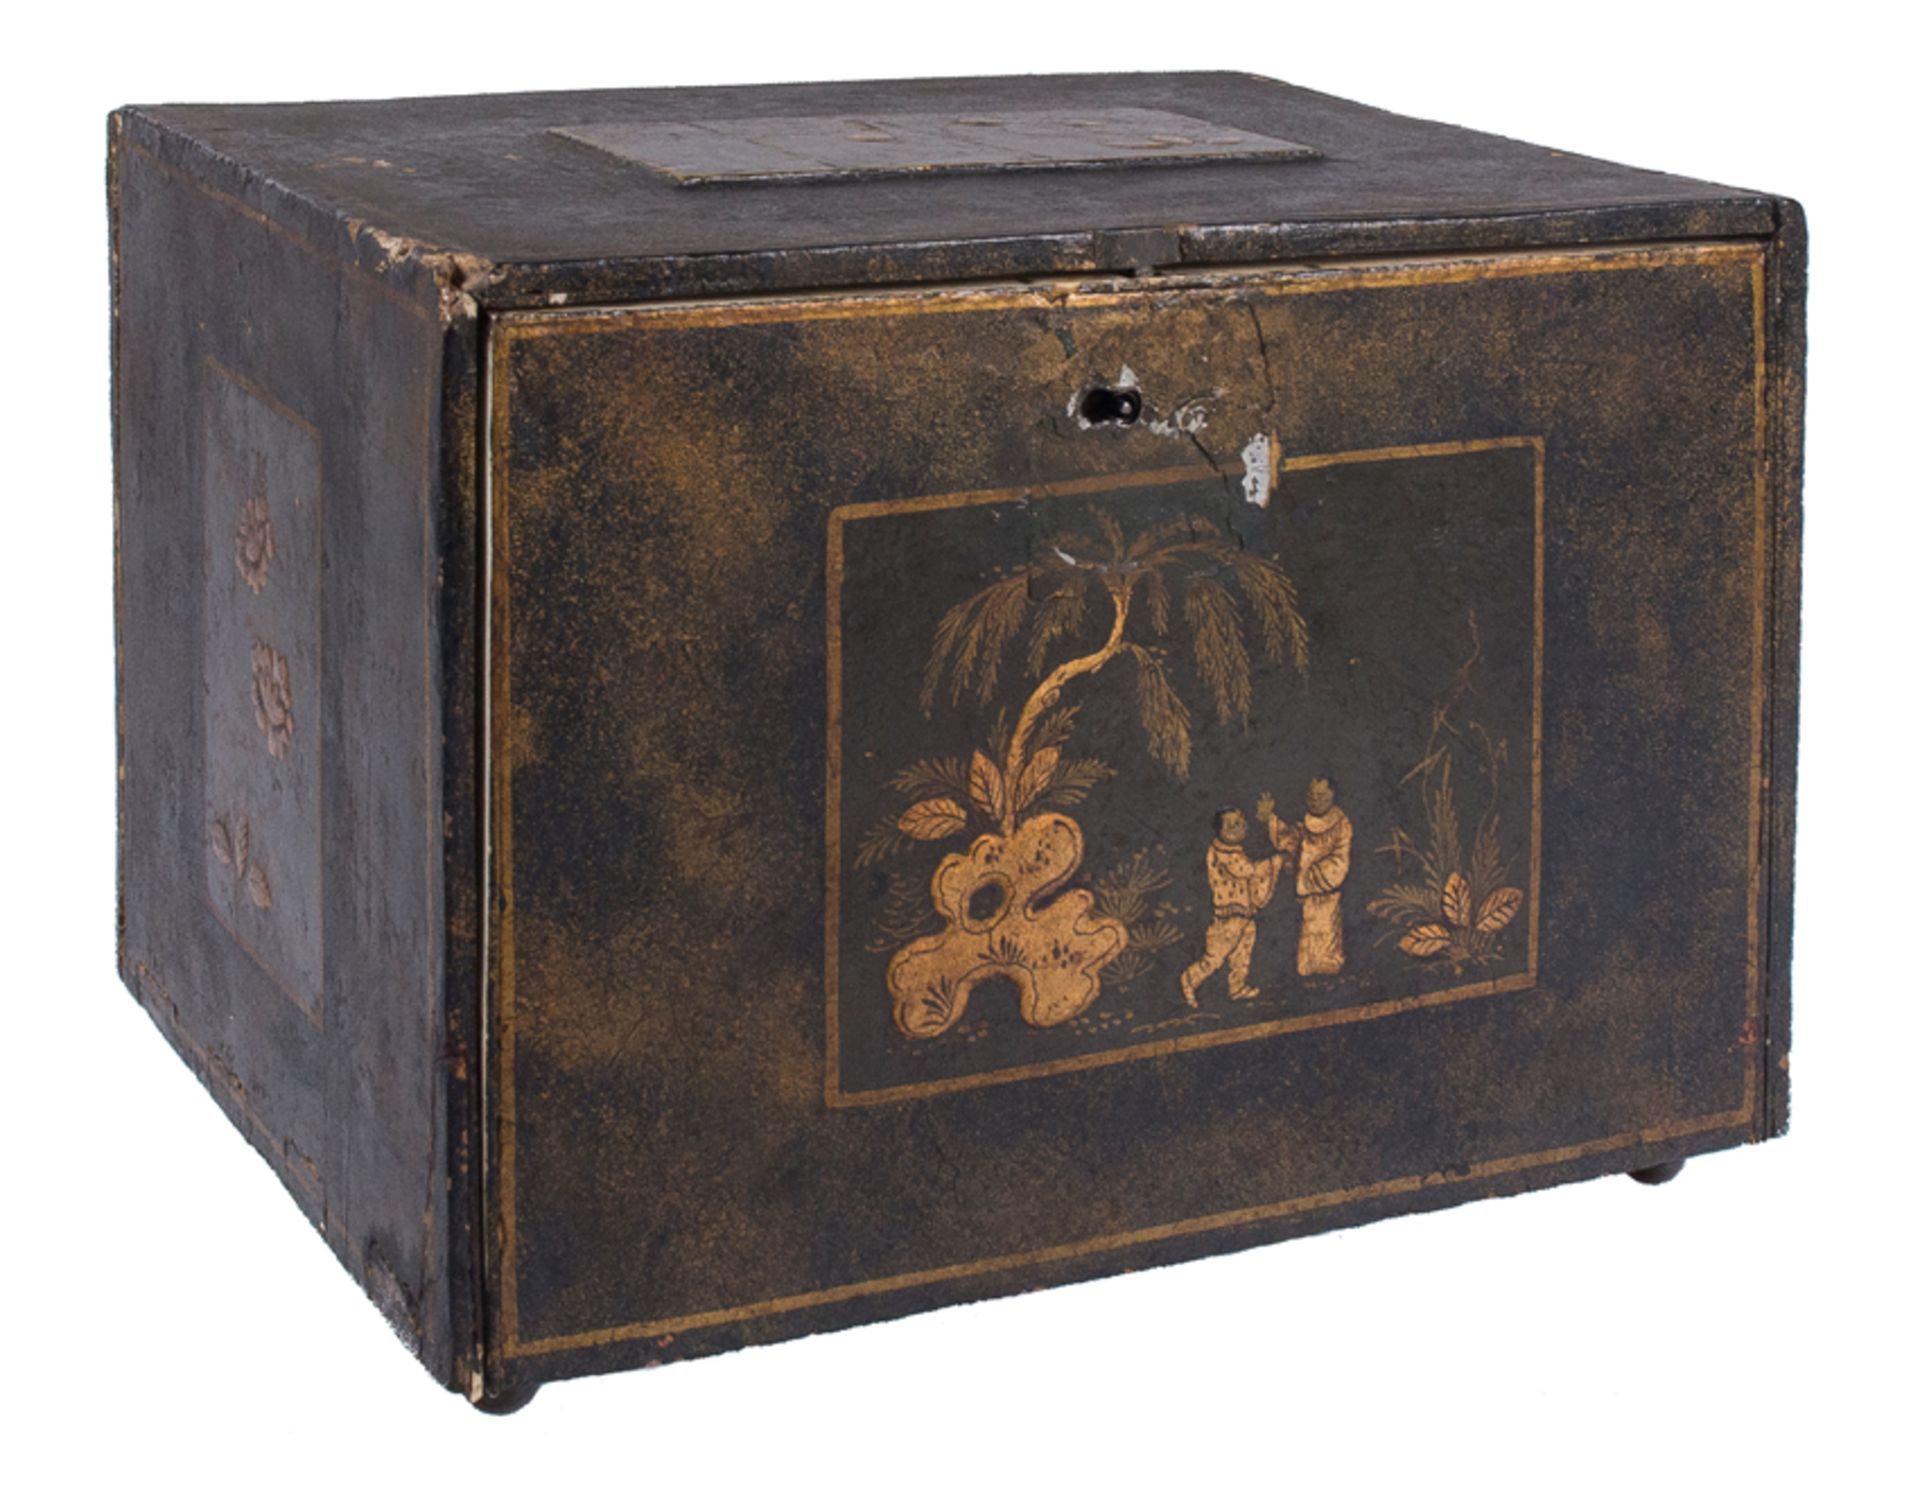 Gilded, lacquered wooden chest with engraved and gilded ivory interior. Indo-Portuguese. 18th centur - Image 5 of 10